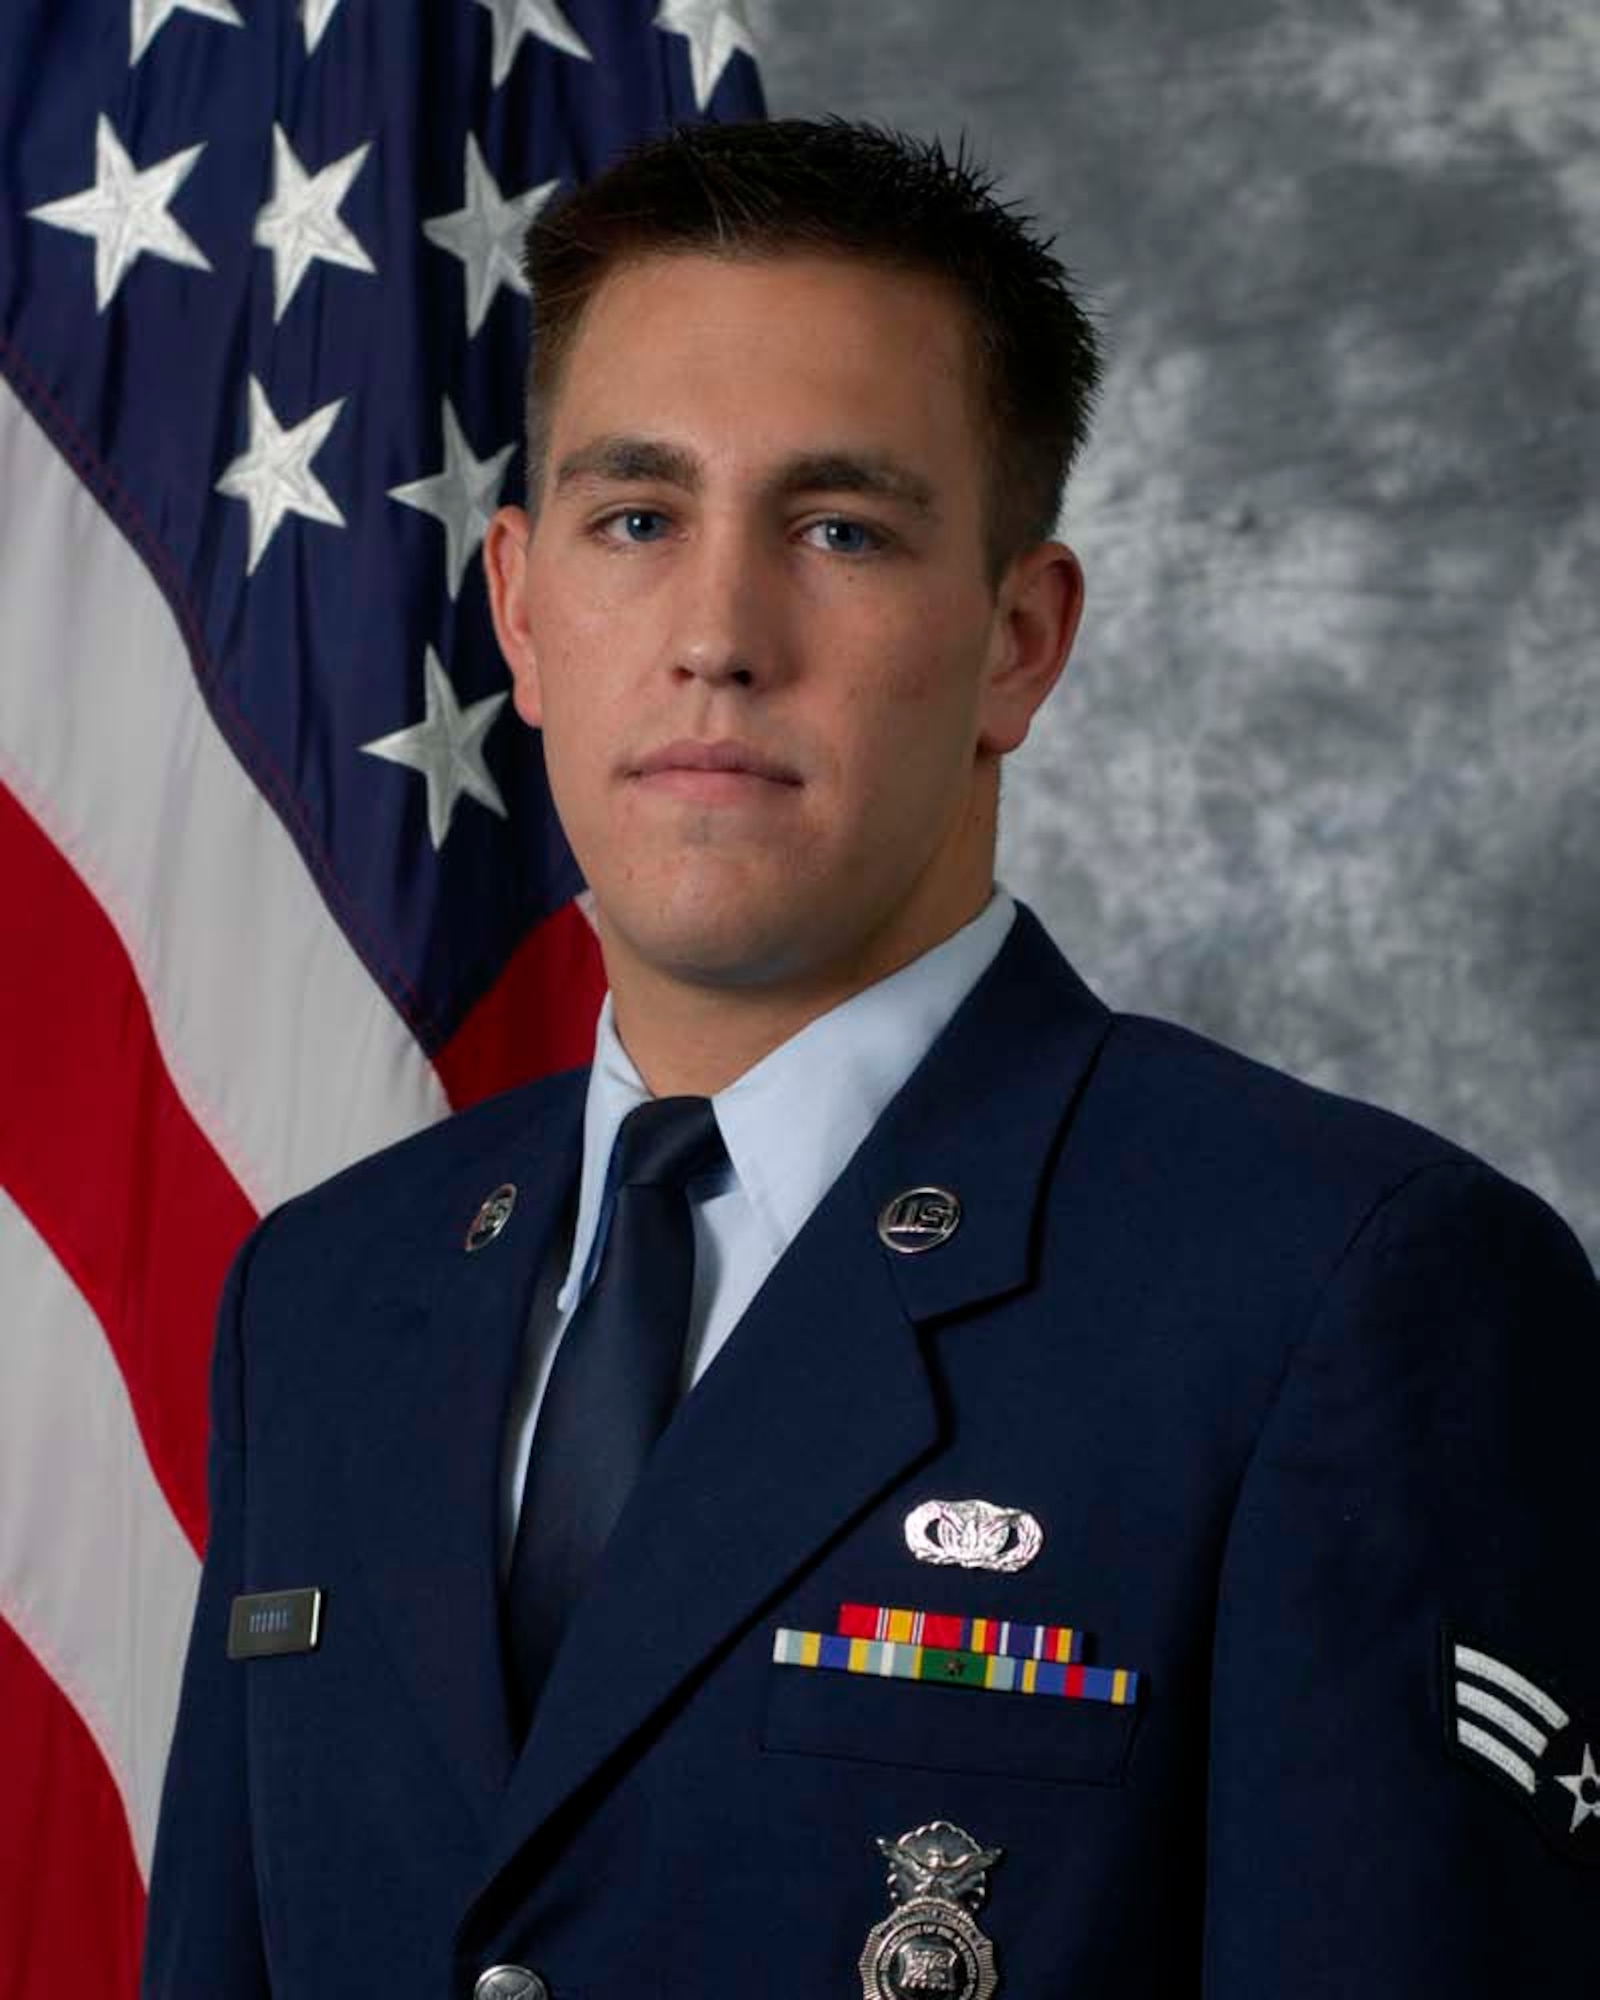 Senior Airman Ryan Pfeifer, a response force leader assigned to the 791st Missile Squadron at Minot Air Force Base, N.D., was recognized as the Airman of the Year. 